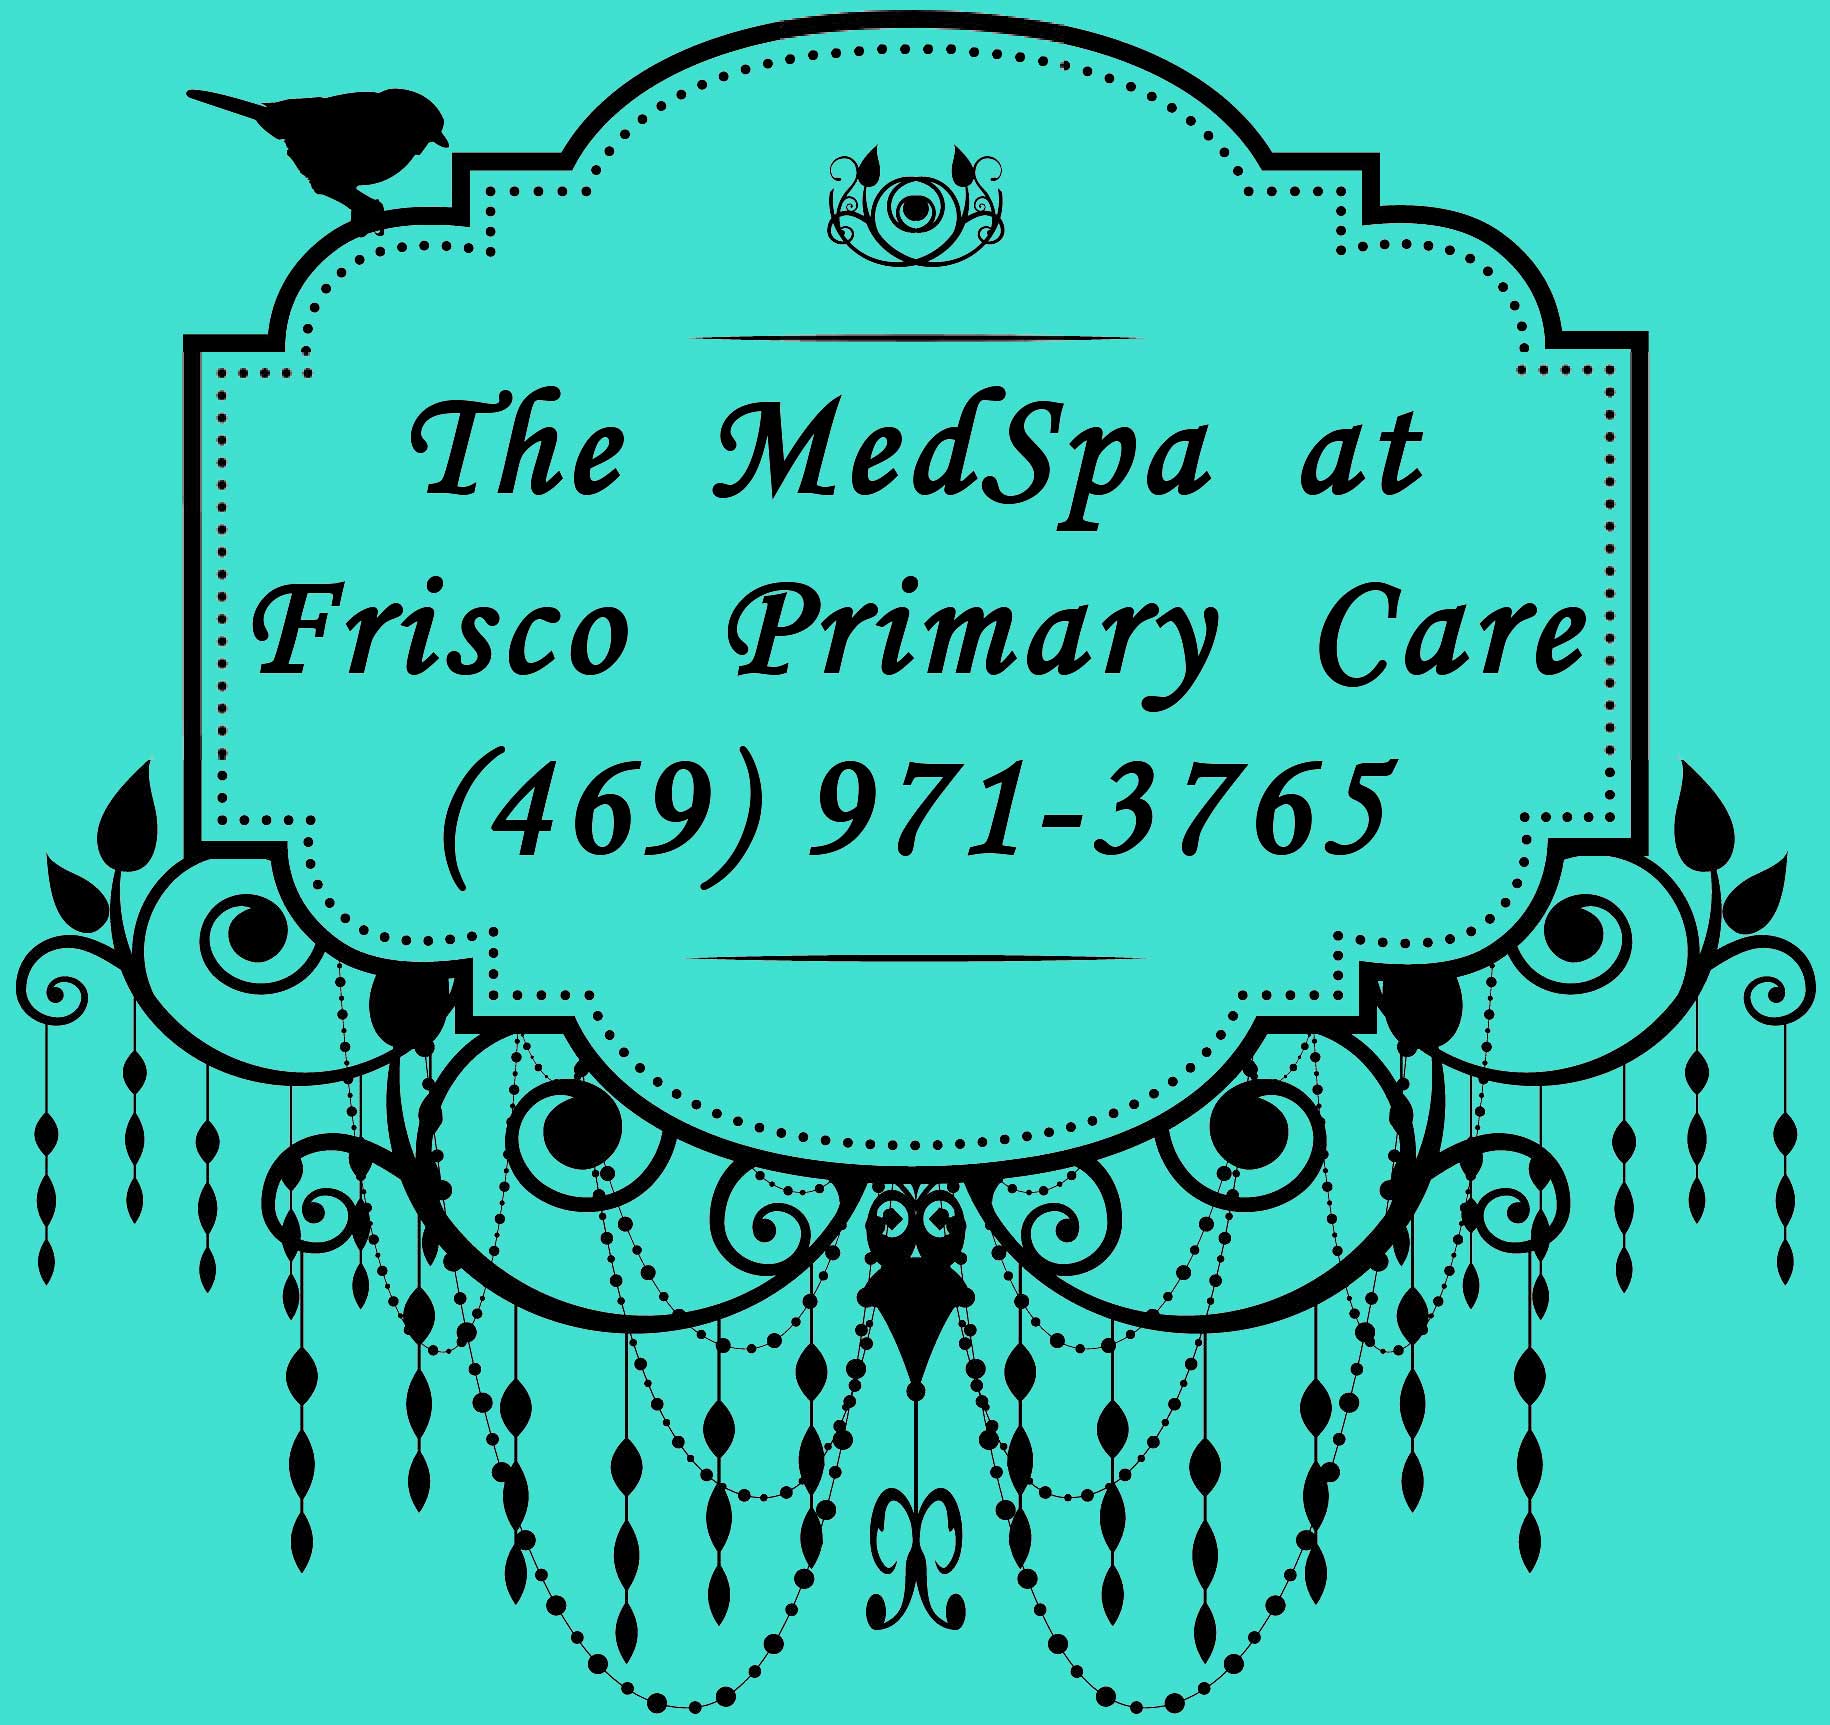 The MedSpa at Frisco Primary Care